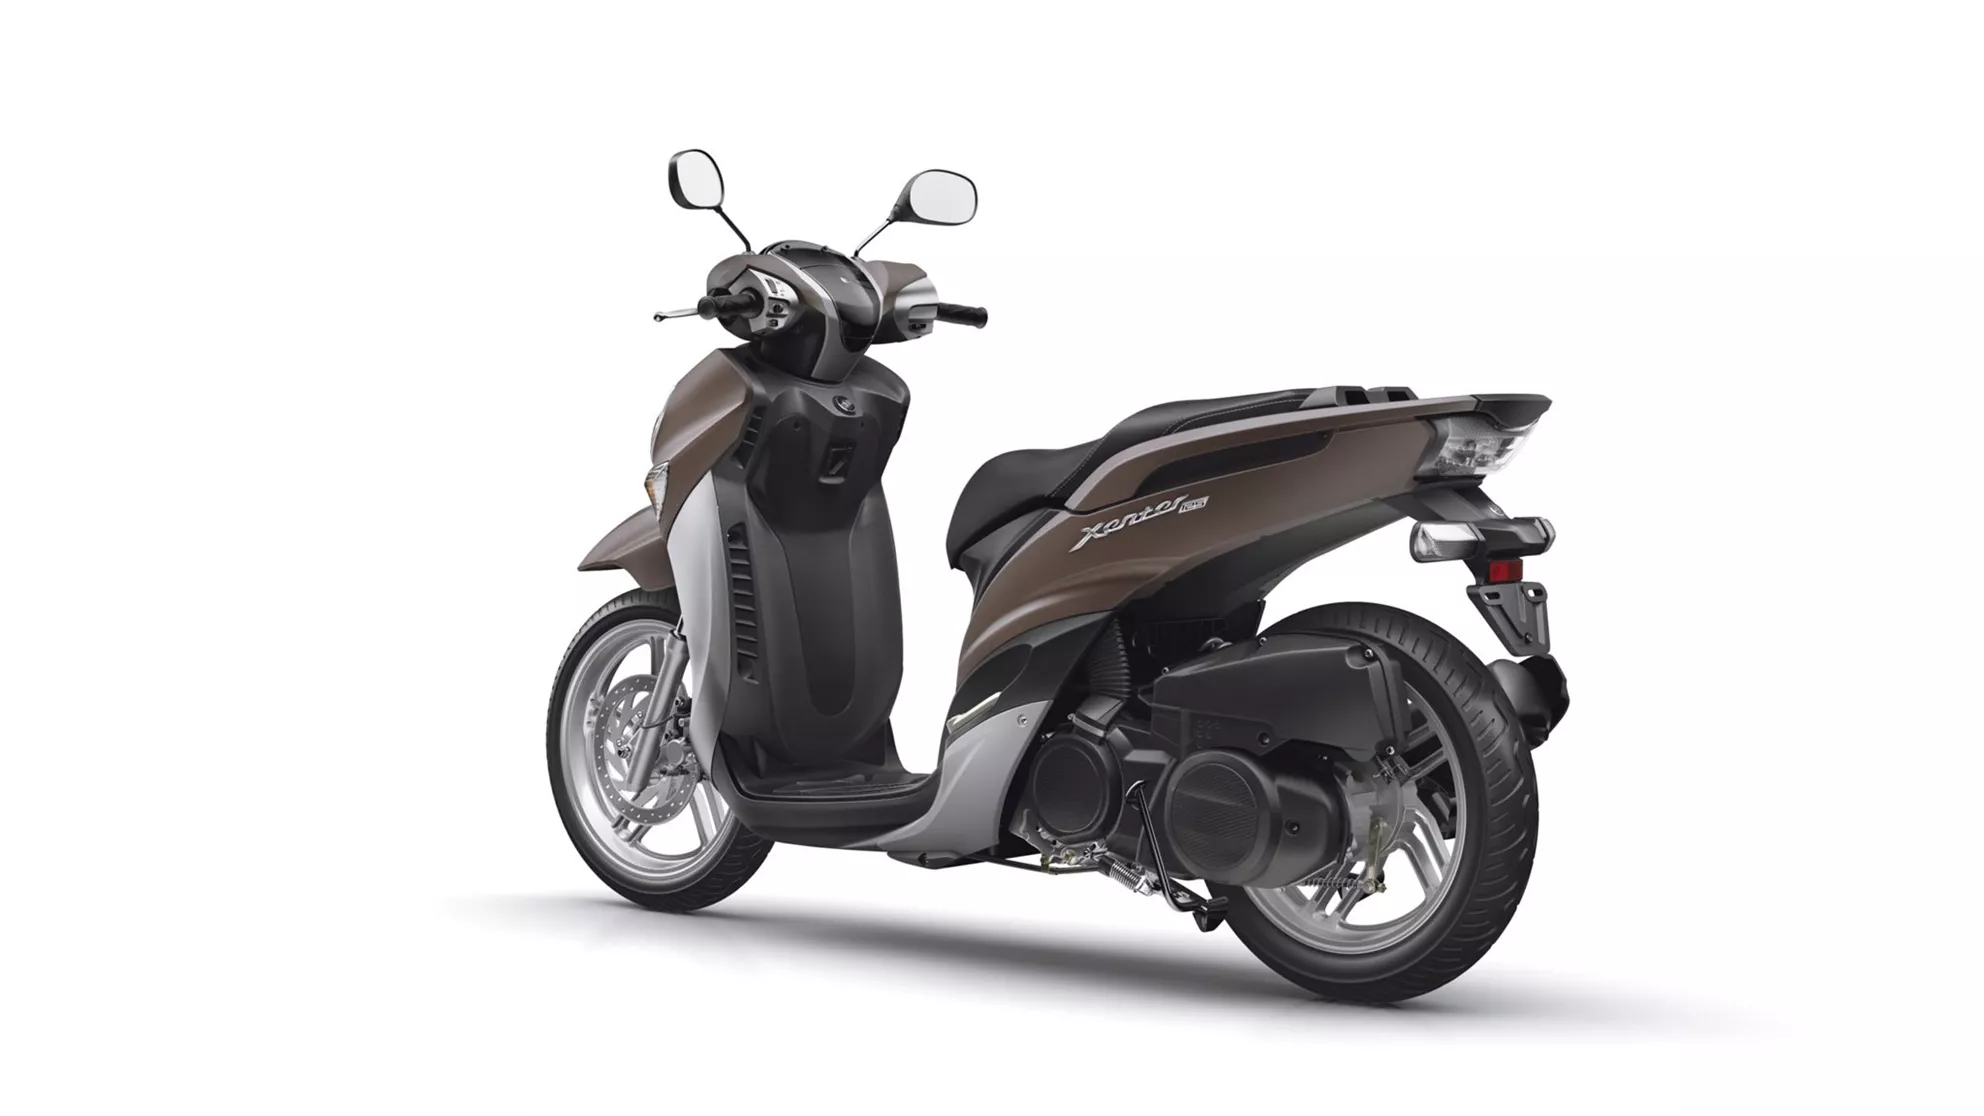 Picture Yamaha Xenter 125